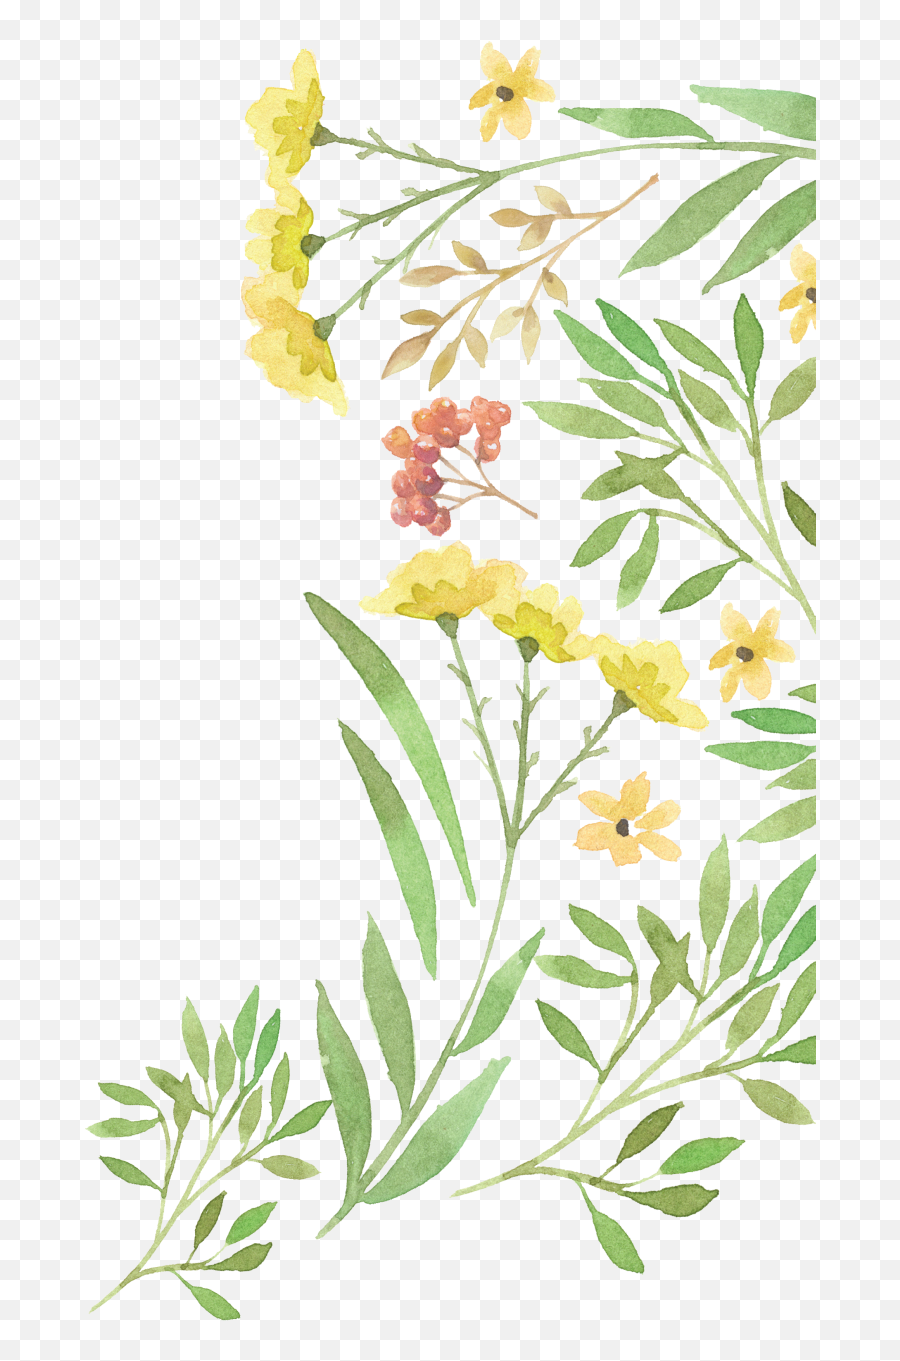 Download Free Png Green Watercolour Flower Png Image With Emoji,Green And Yellow Flower Logo